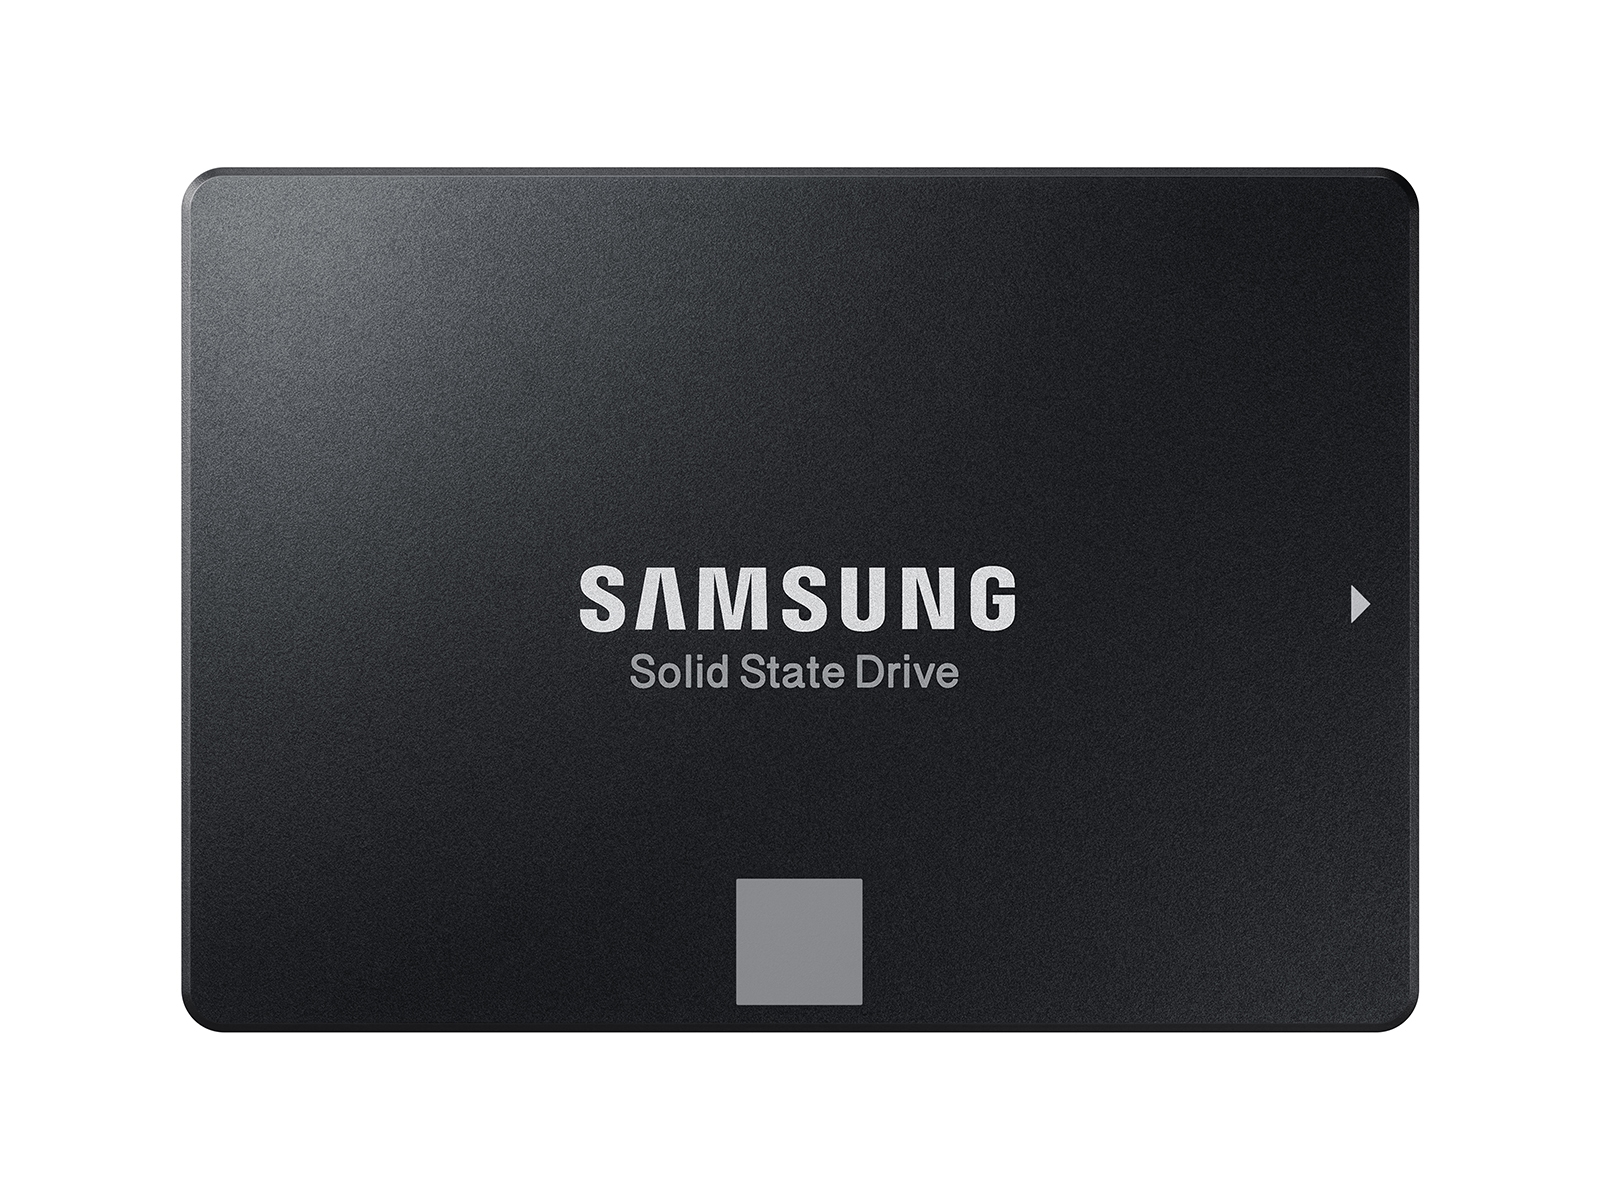 bankruptcy Disguised all the best SSD 860 EVO 2.5" SATA III 250GB Memory & Storage - MZ-76E250B/AM | Samsung  US